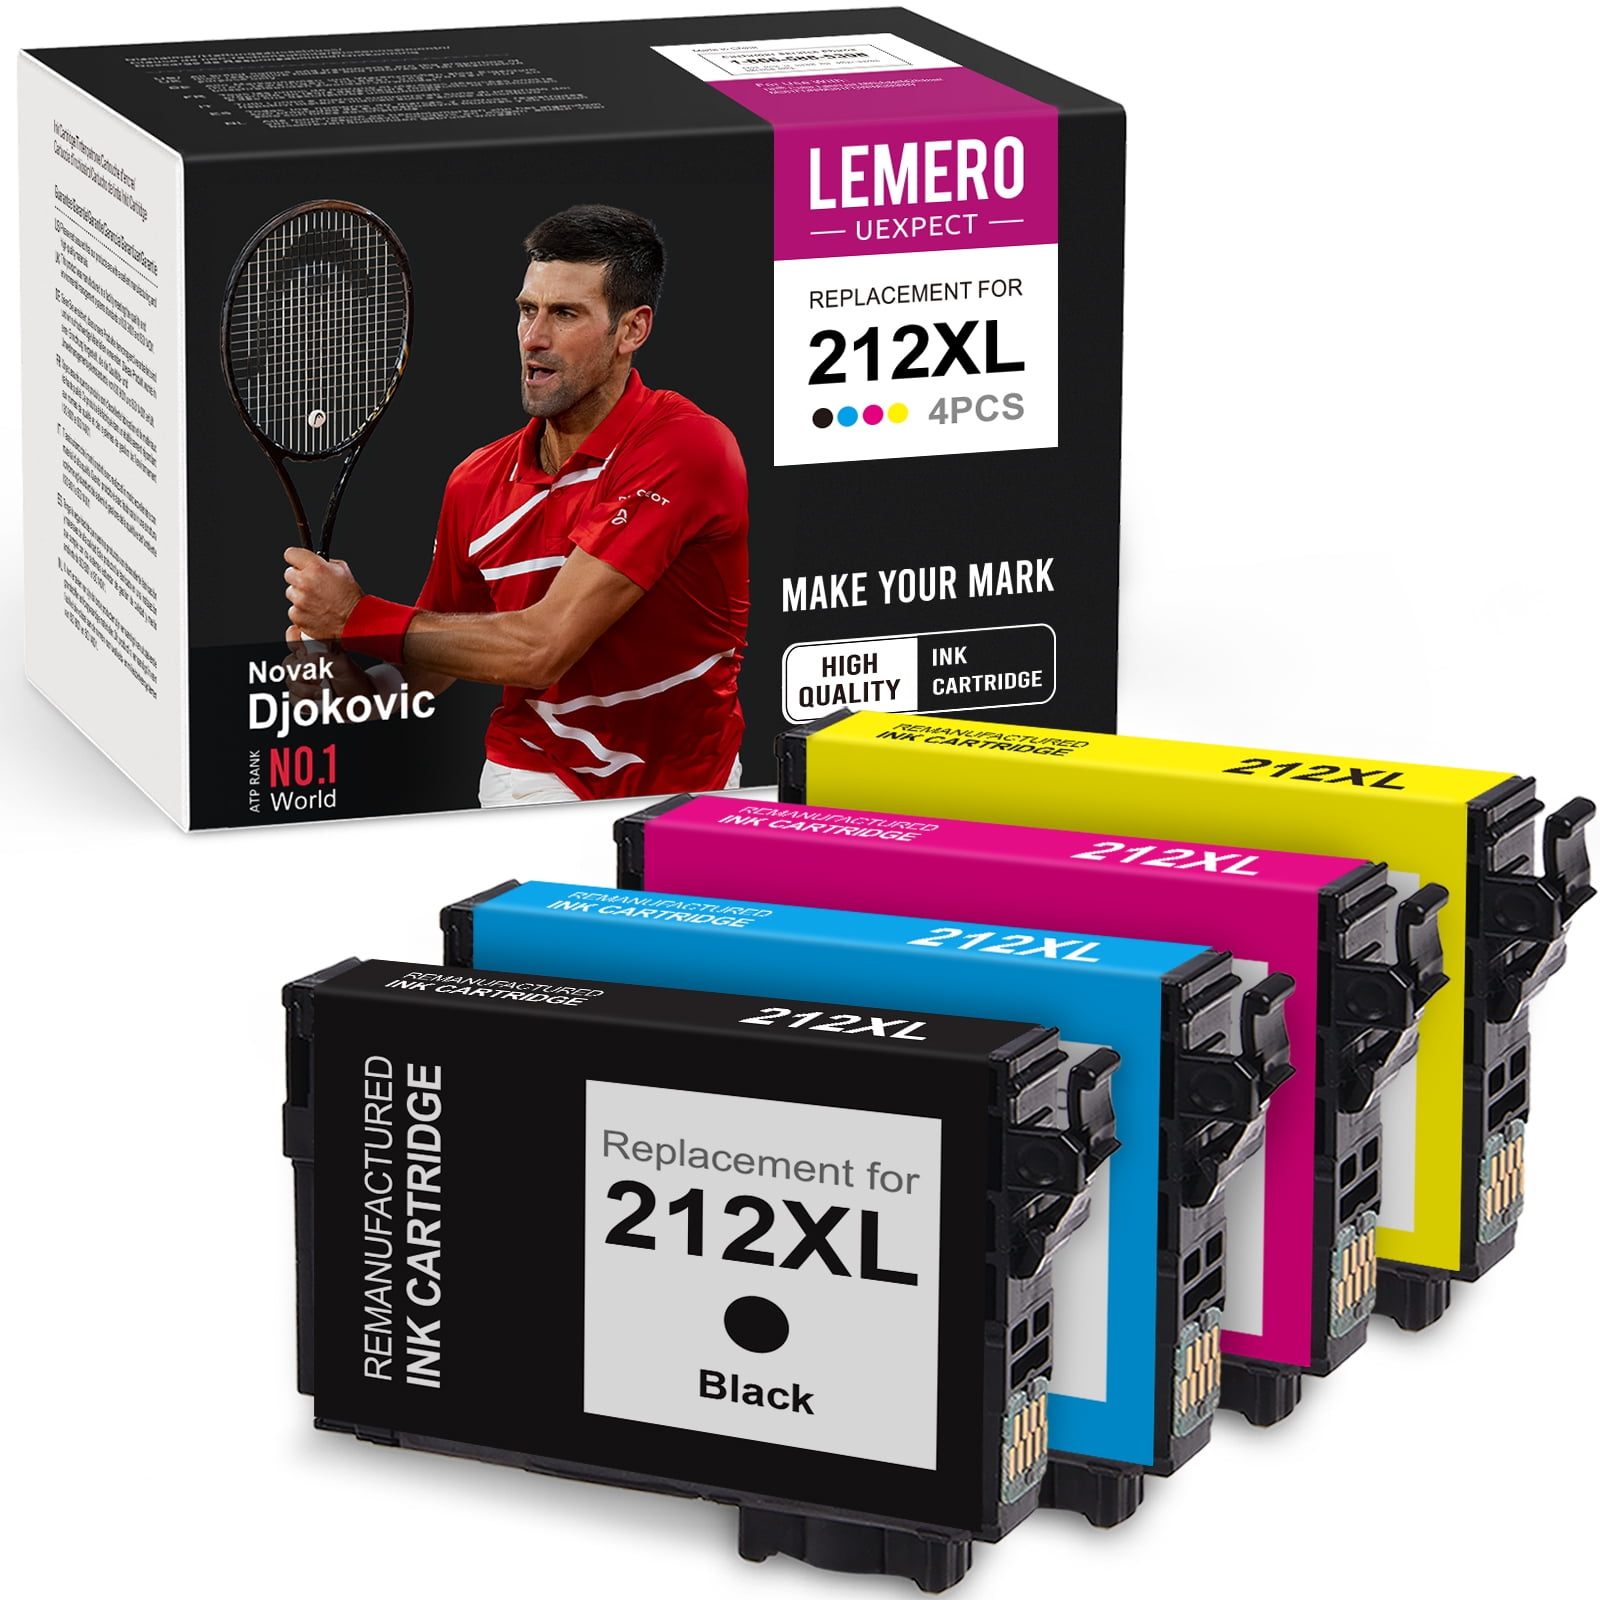 Lemerouexpect Remanufactured 212xl Ink Replacement For Epson 212 Xl 212xl T212xl Ink Cartridge 7265